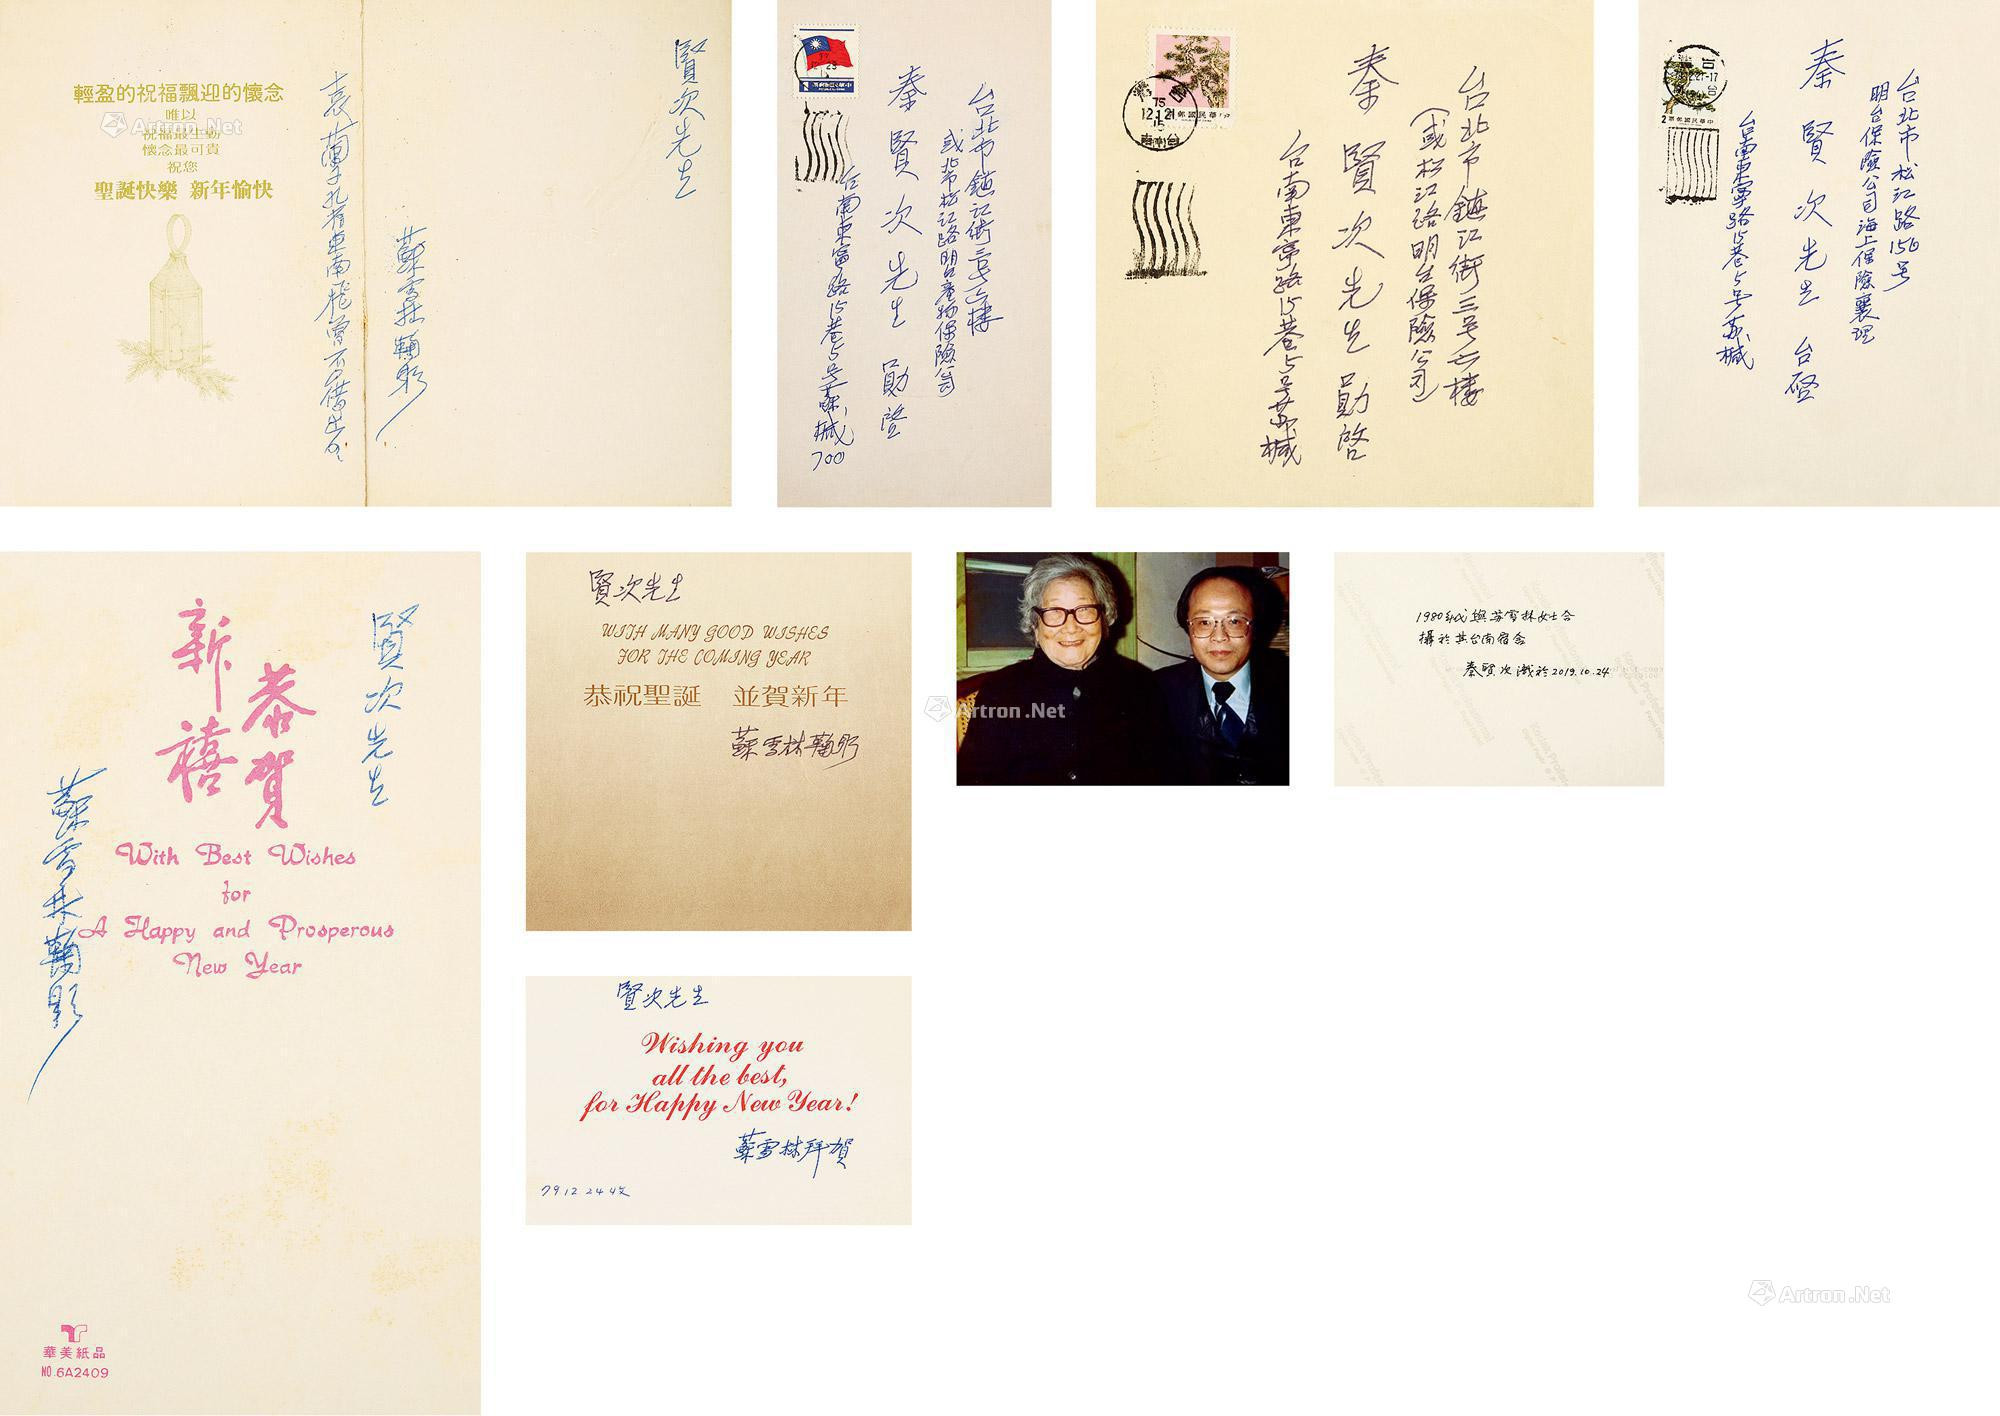 Four Greeting cards by Su Xuelin to Qin Xianci， with three original covers and inscribed photo of Qin Xianci and Su Xuelin by Qin Xianci